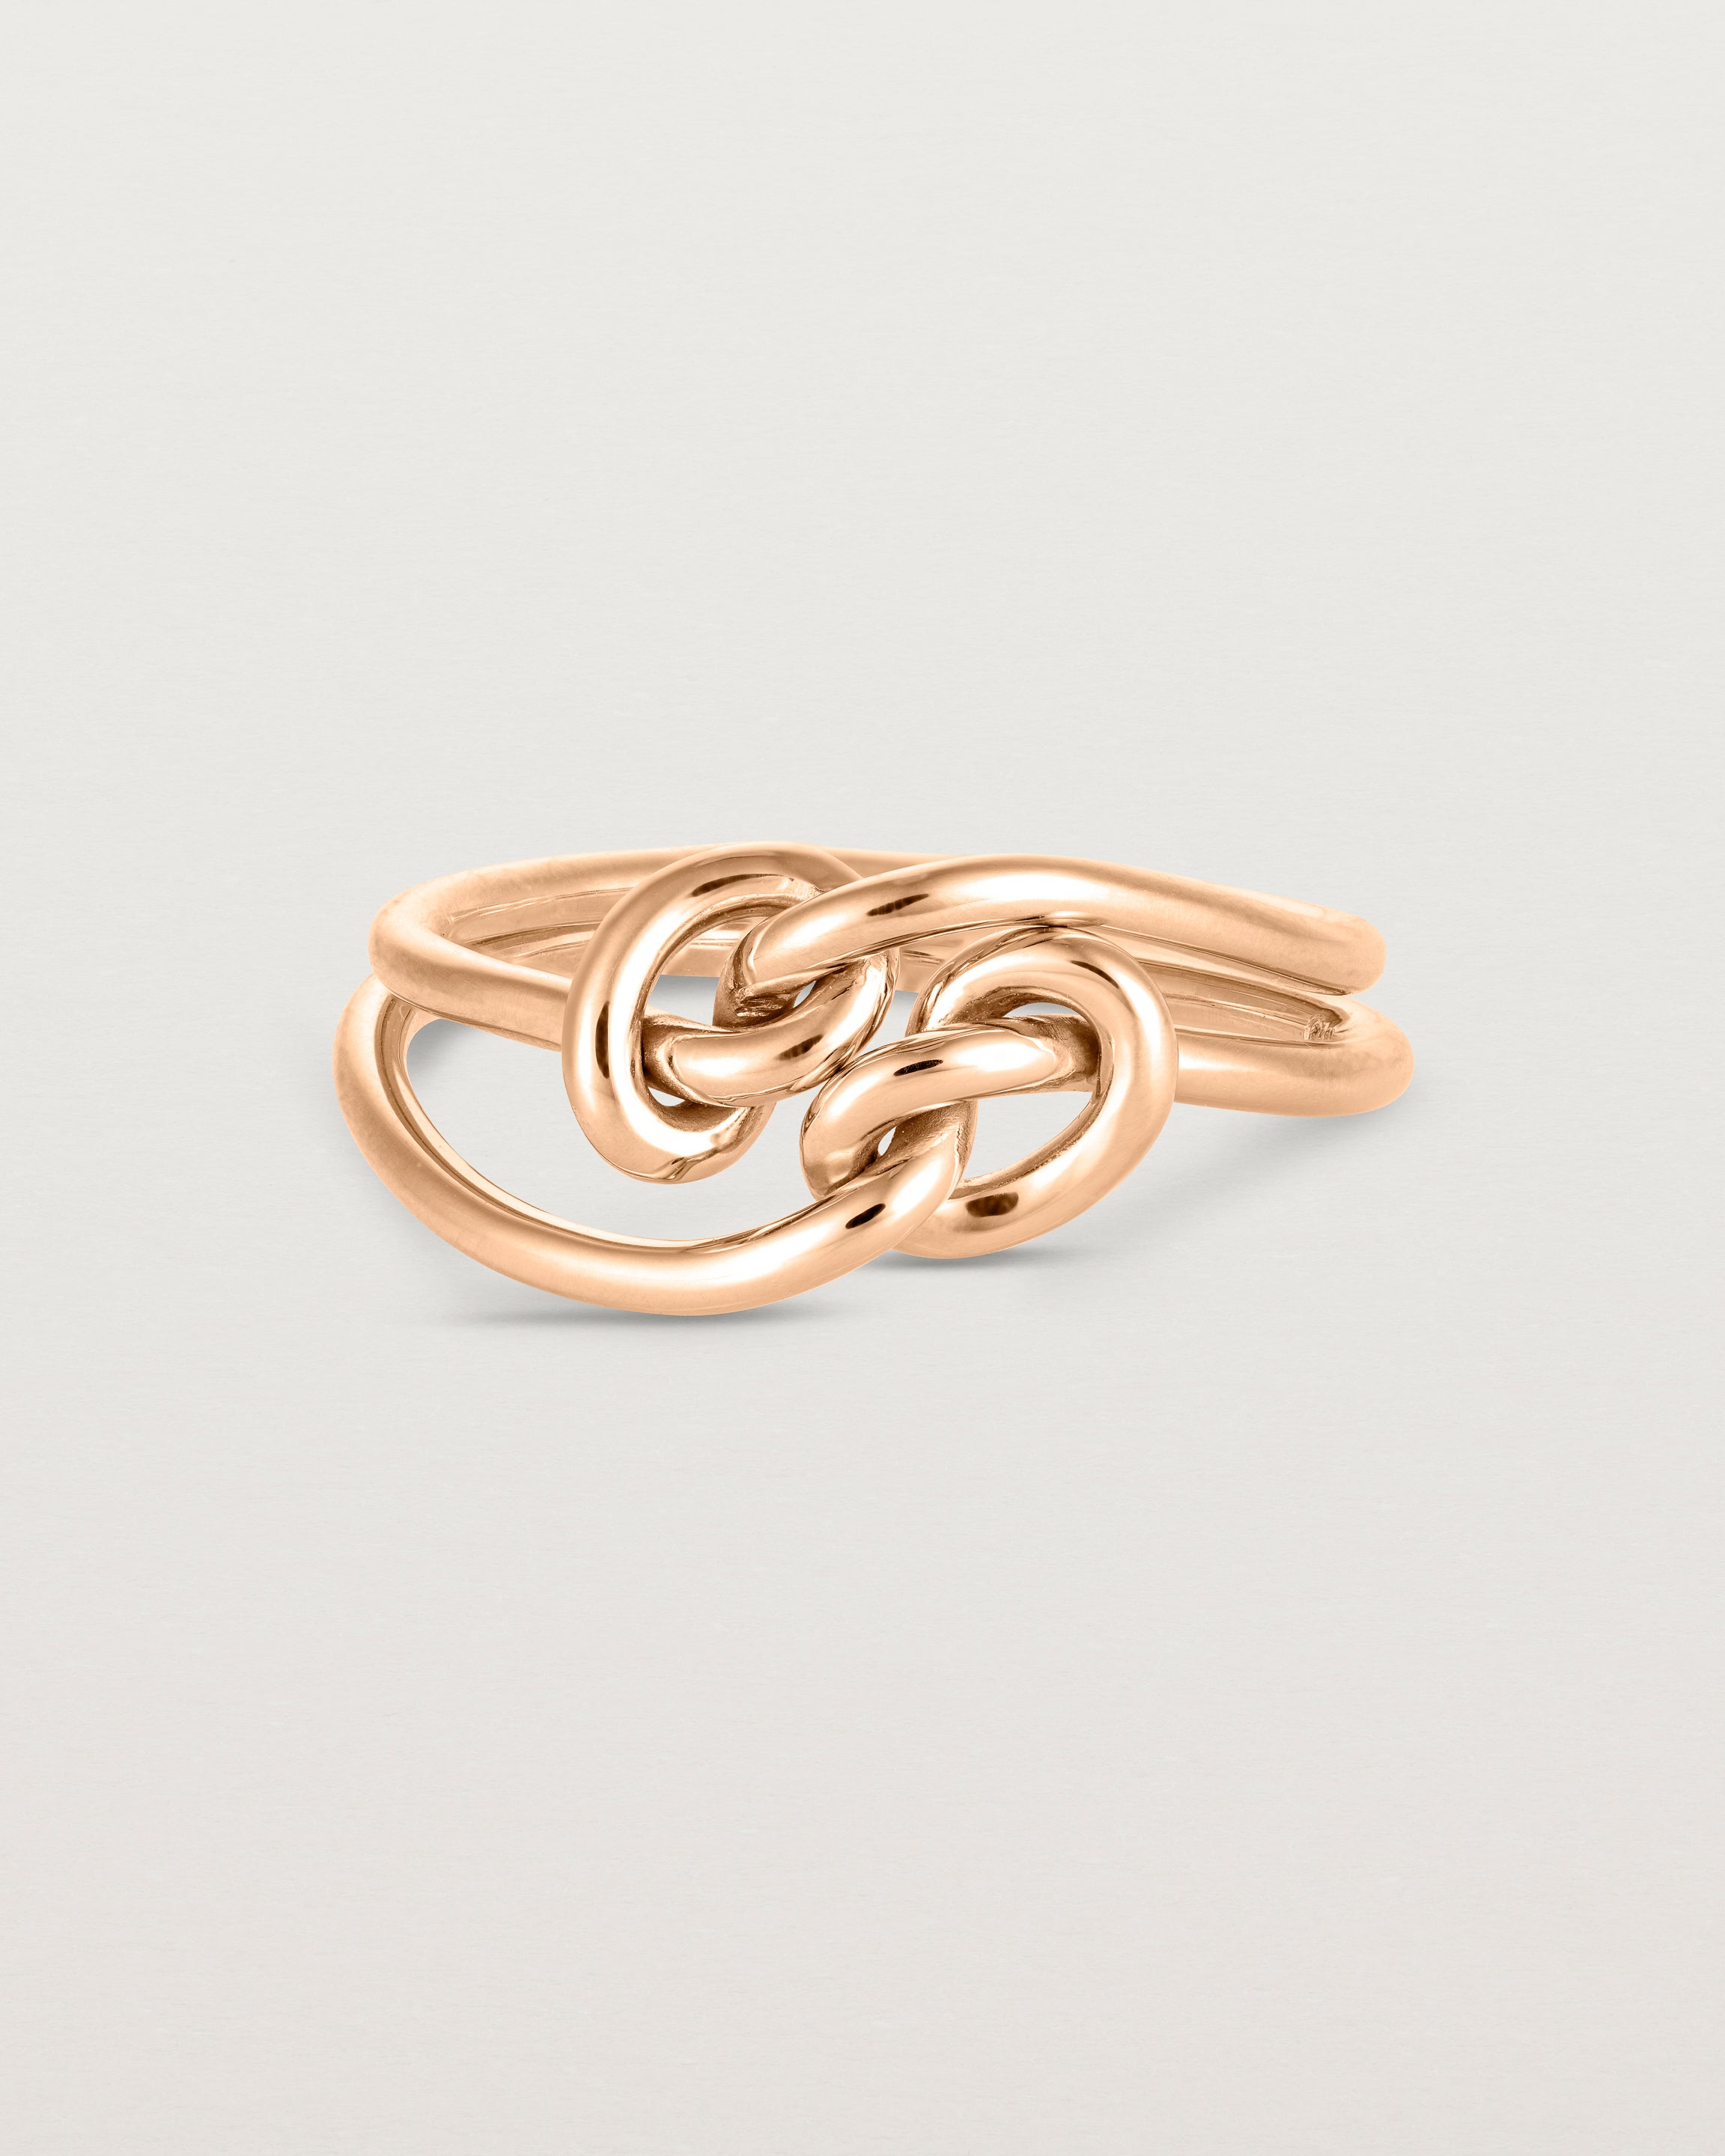 Stacked view of the Cara Ring in rose gold.